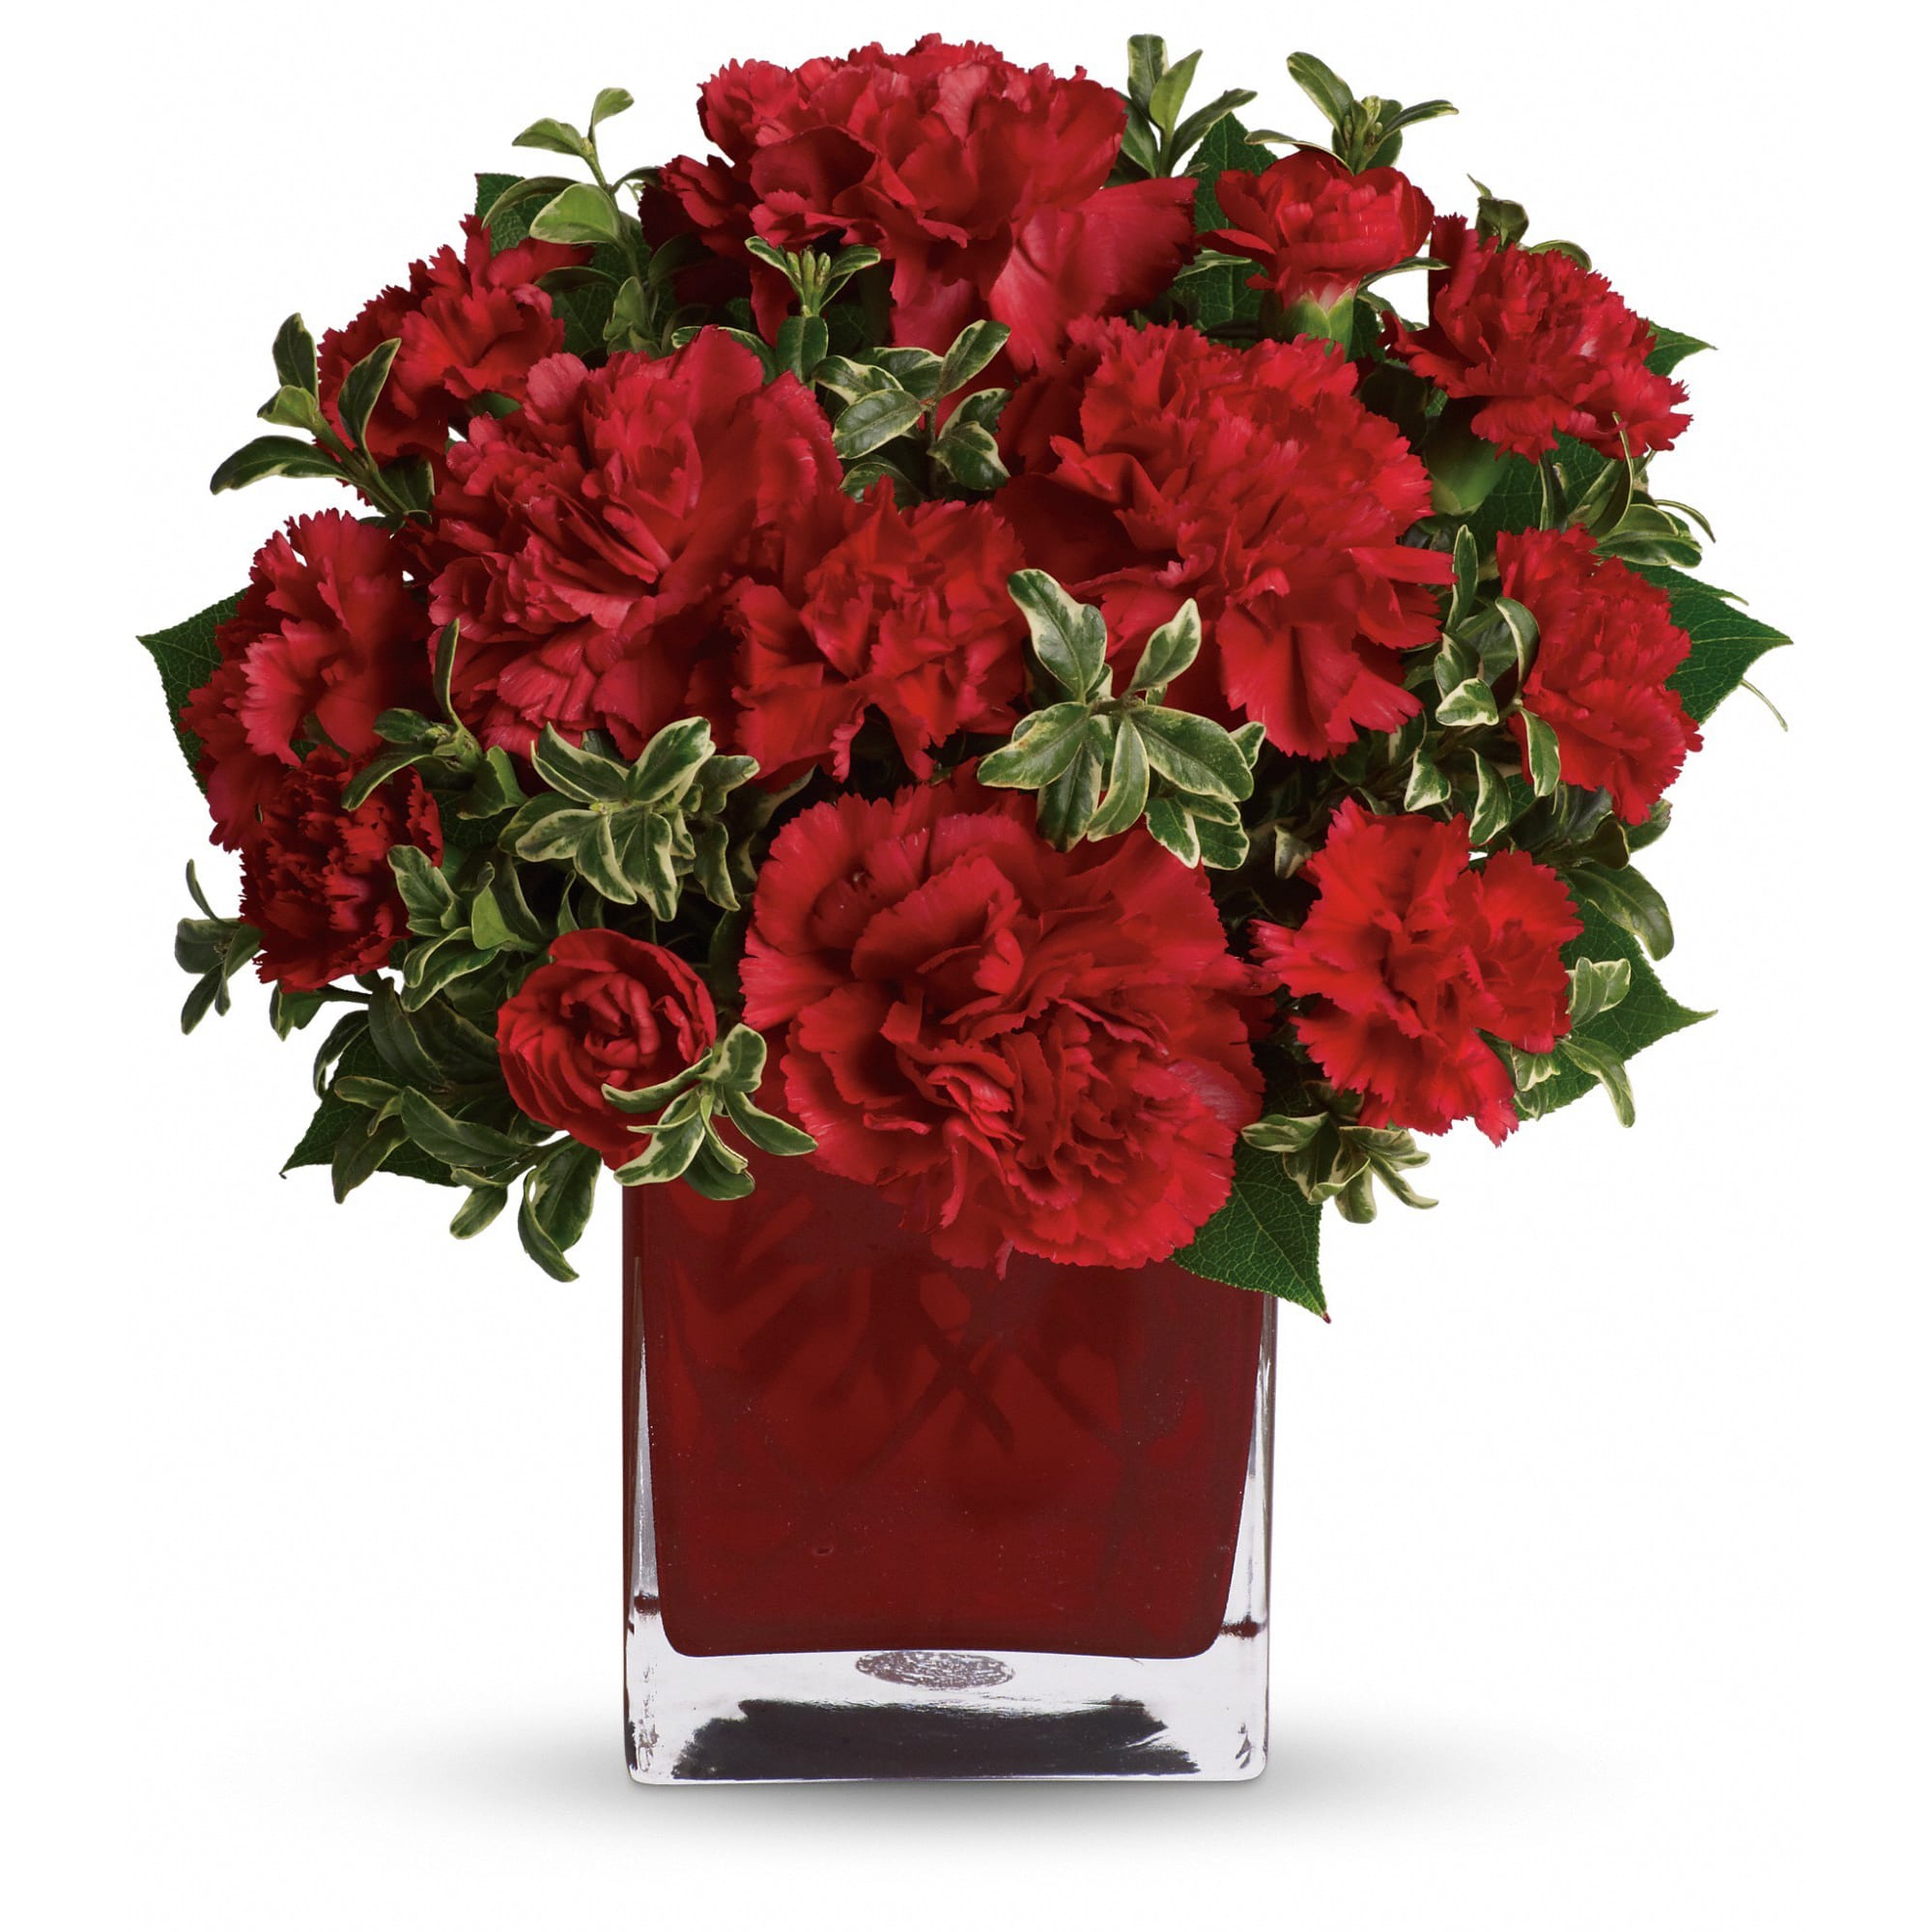 Precious Love - Simply speaking, red means romance. Send this bouquet of vibrant red carnations to your sweetheart and you'll convey passion, energy and desire. Remember also that you're sending not one gift but two: gorgeous flowers and a colorful cube vase. 